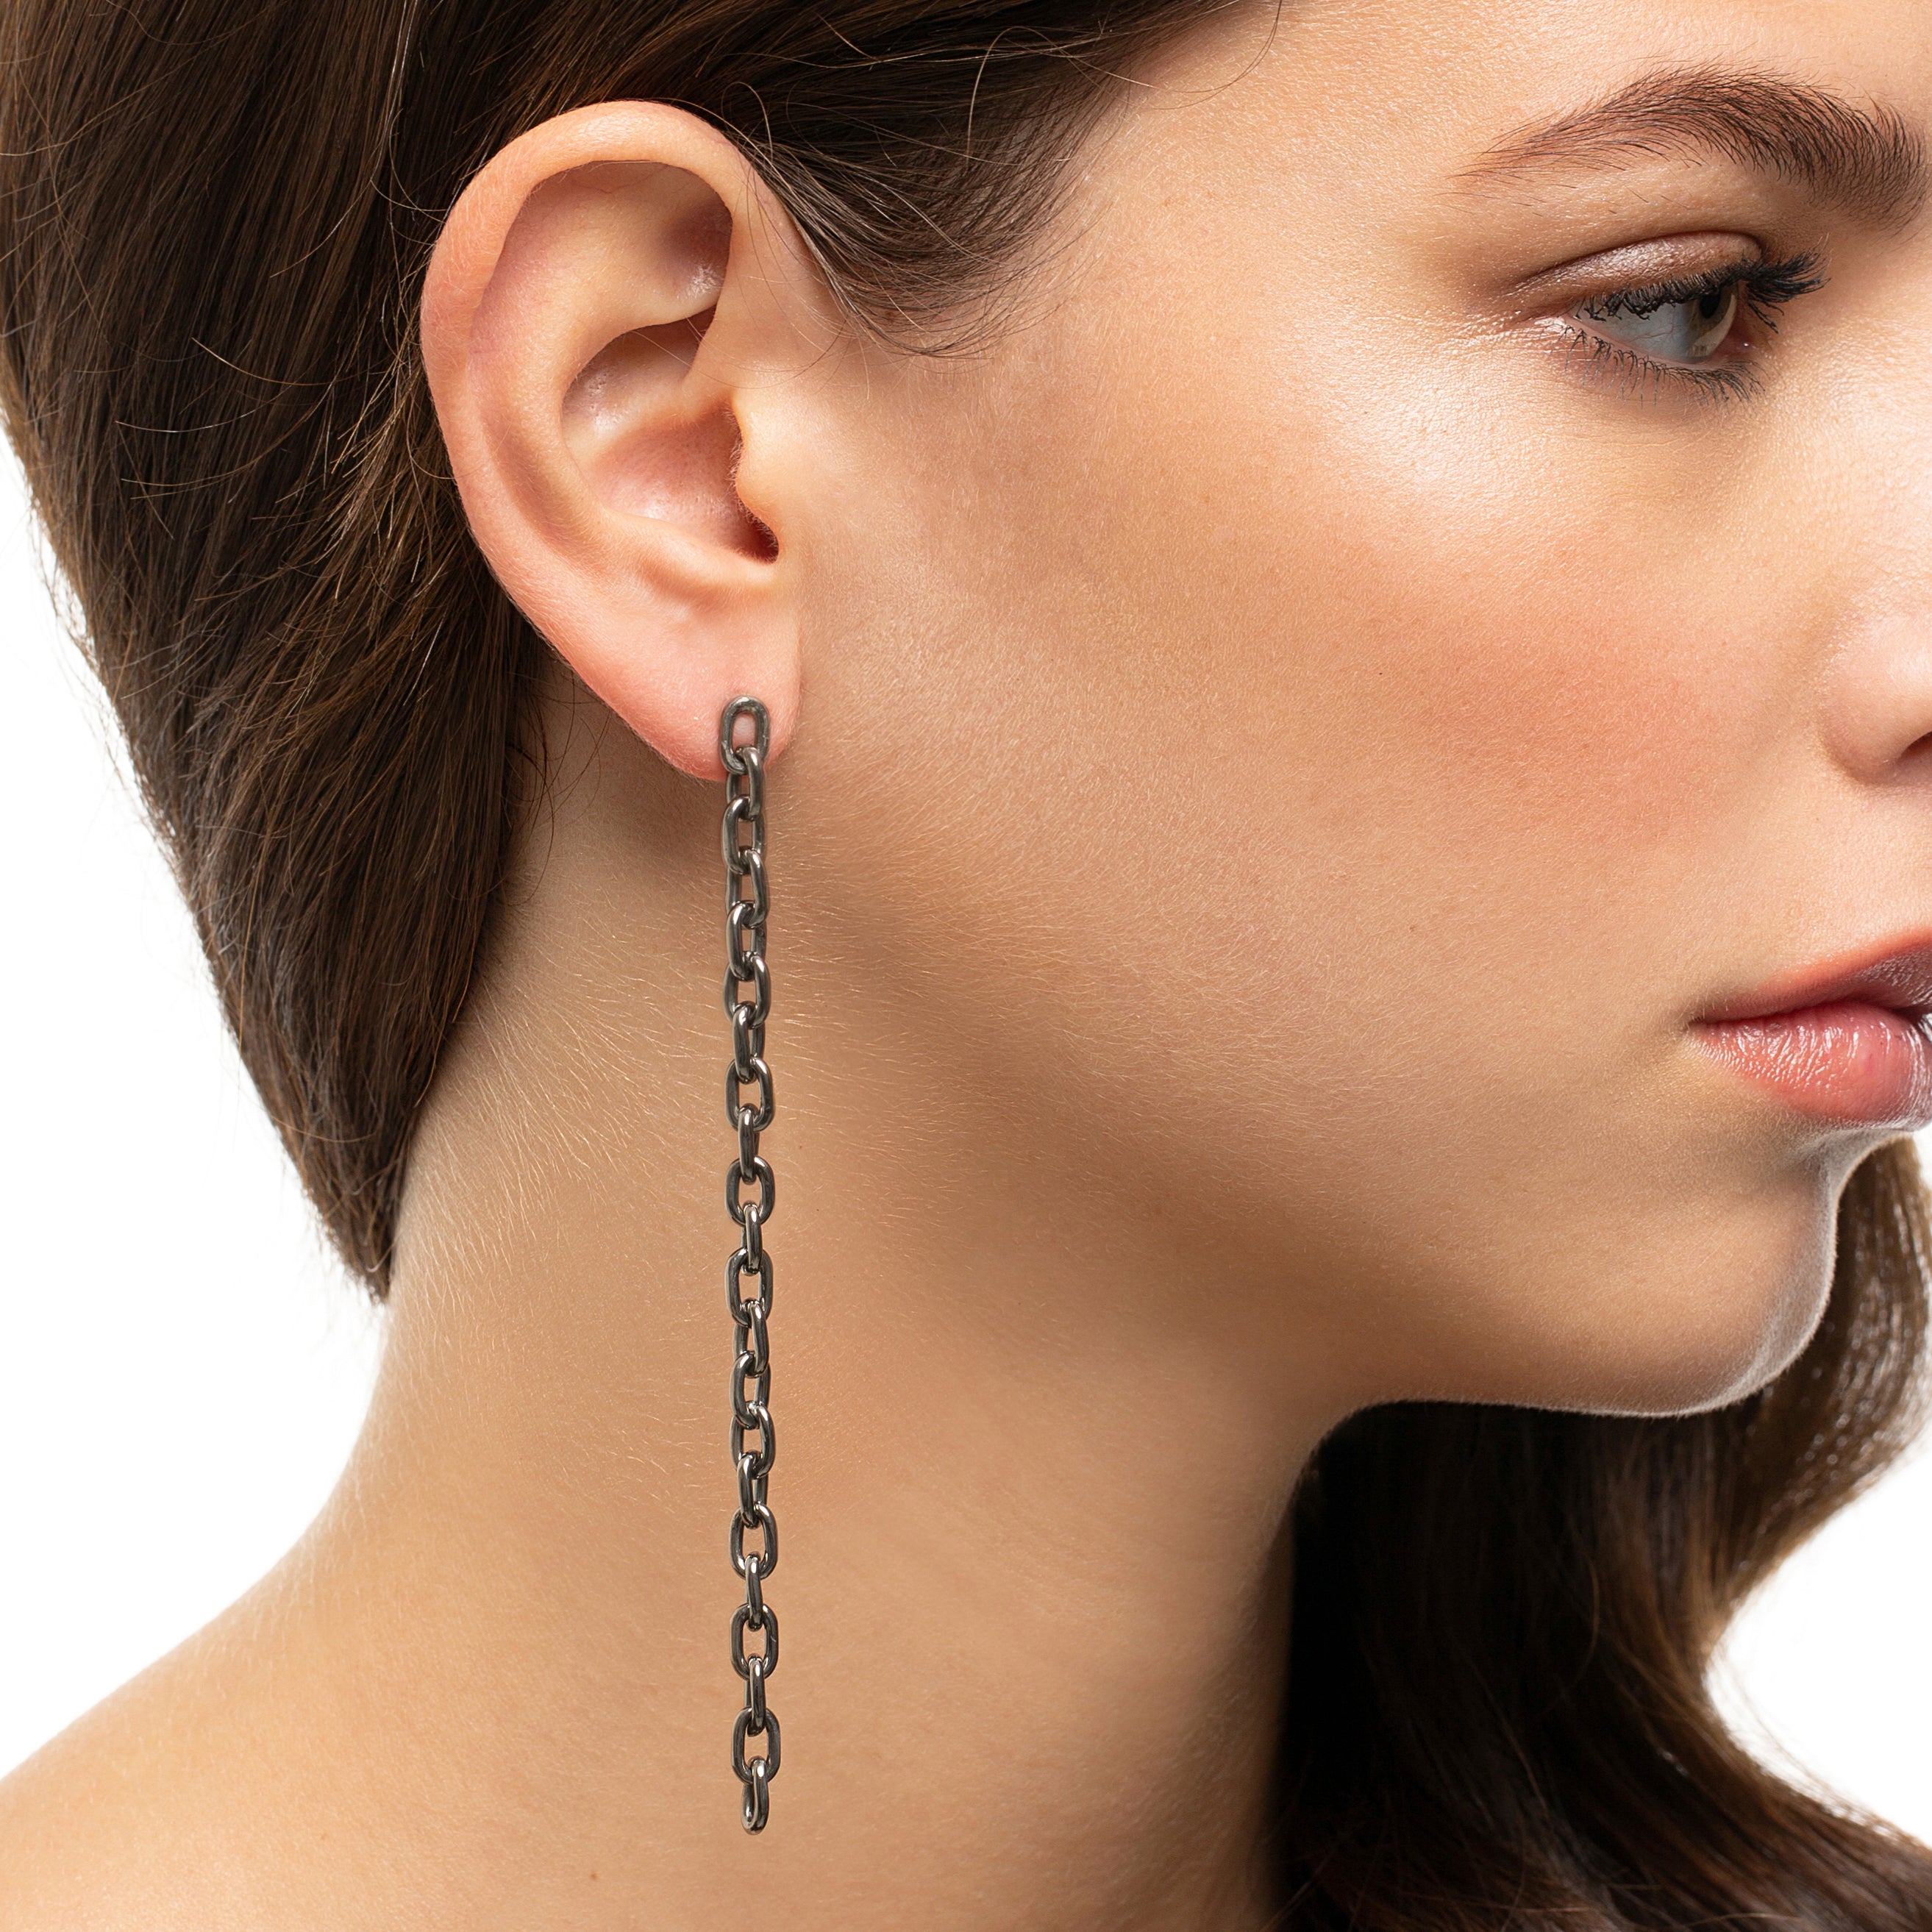 CHAIN LONG EARRING IN BLACK RHODIUM PLATED SILVER